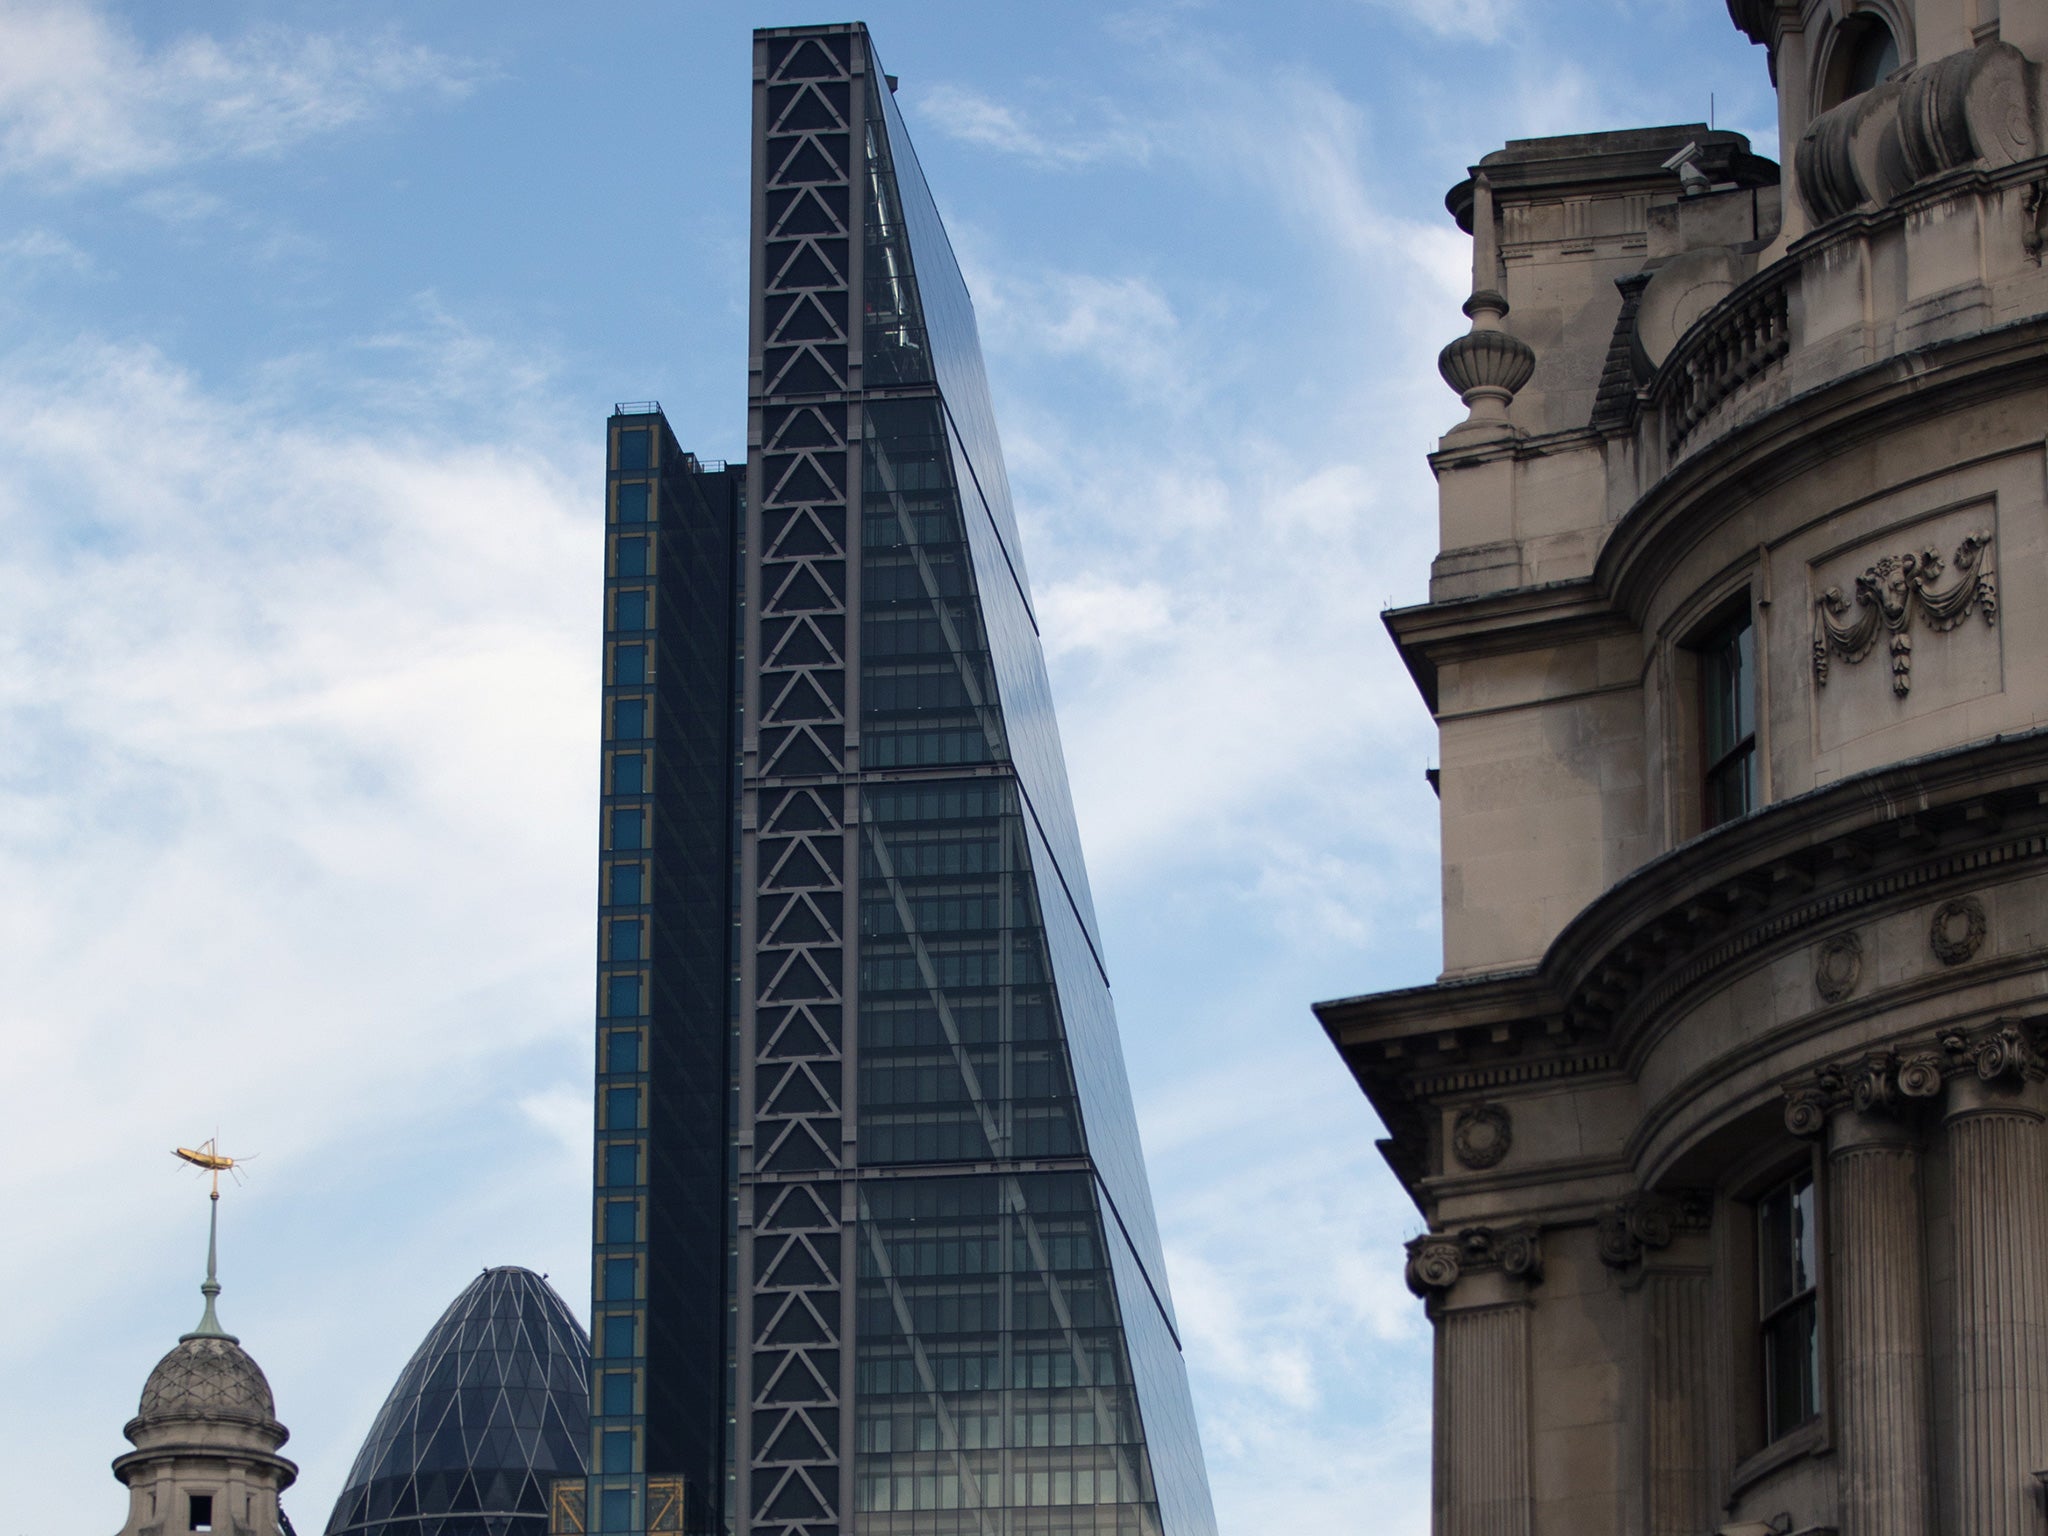 The Cheesegrater building built by Severfield